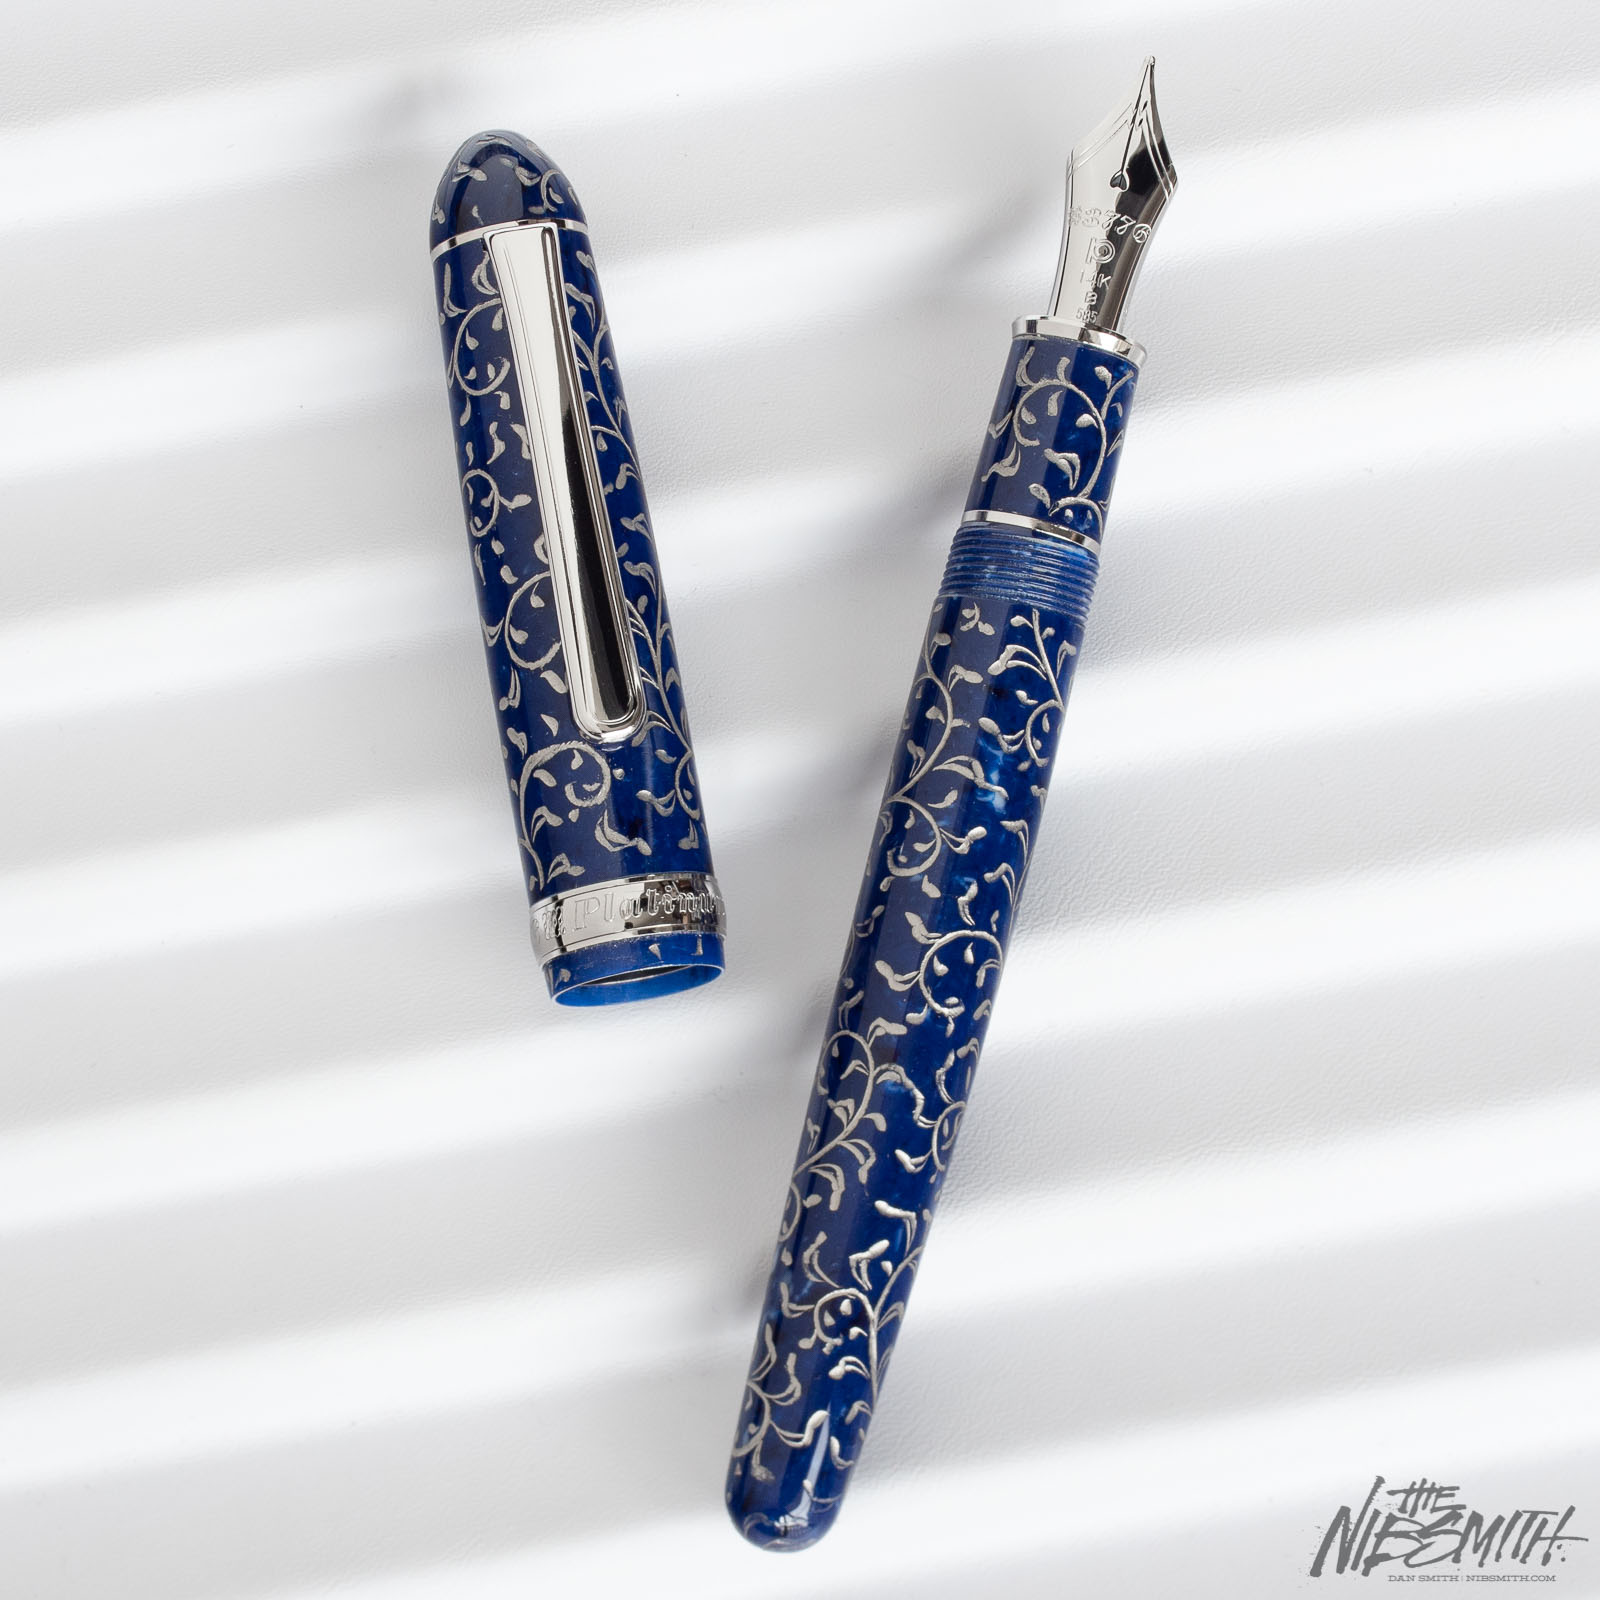 Platinum 3776 Century LE Fountain Pen - Nice (Clear Frosted) w